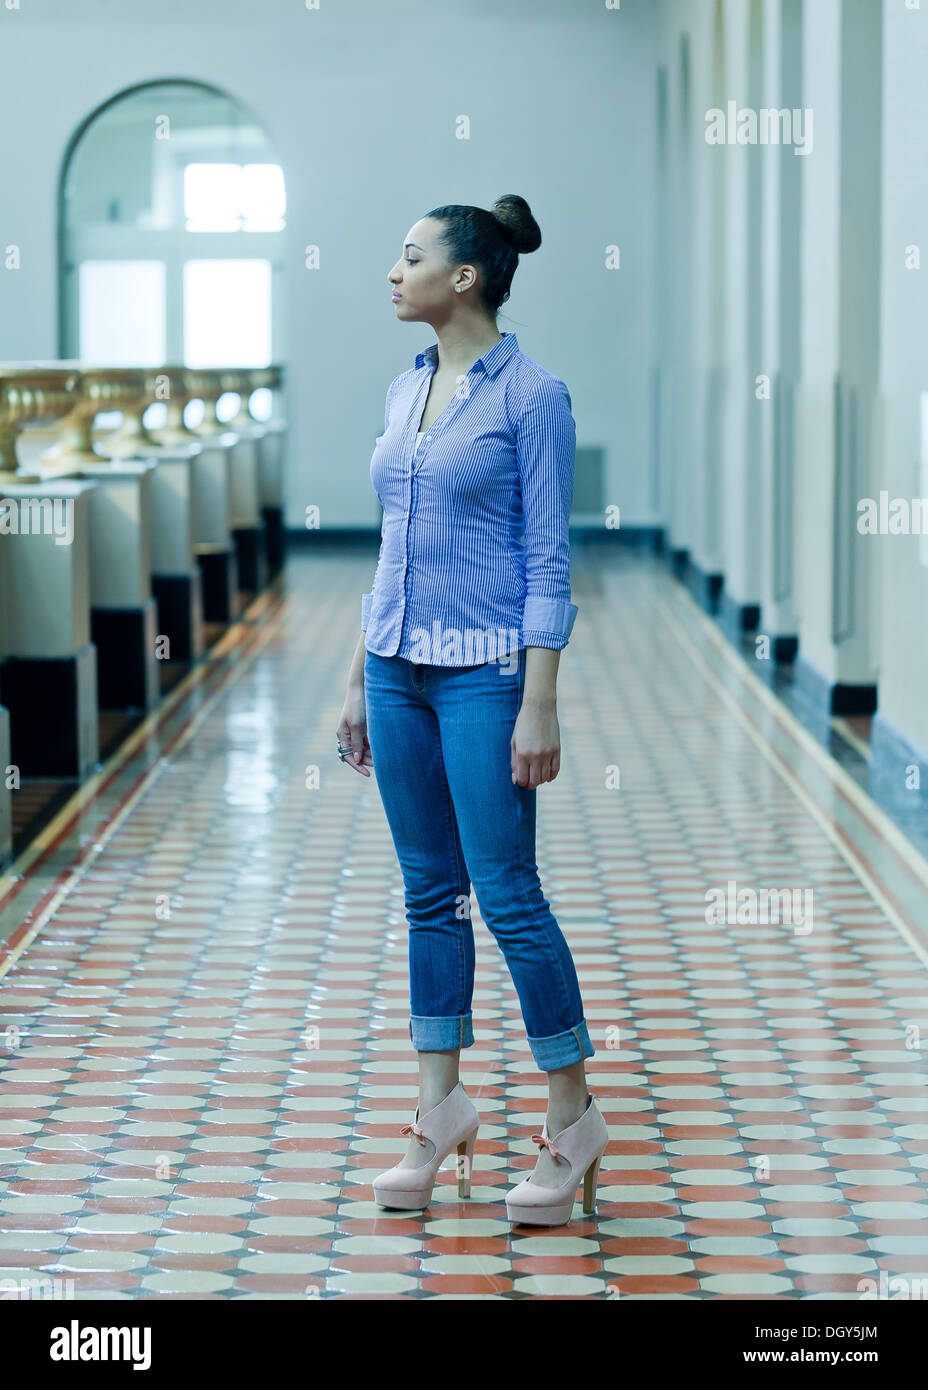 African-American woman standing on colorful tile floor Stock Photo